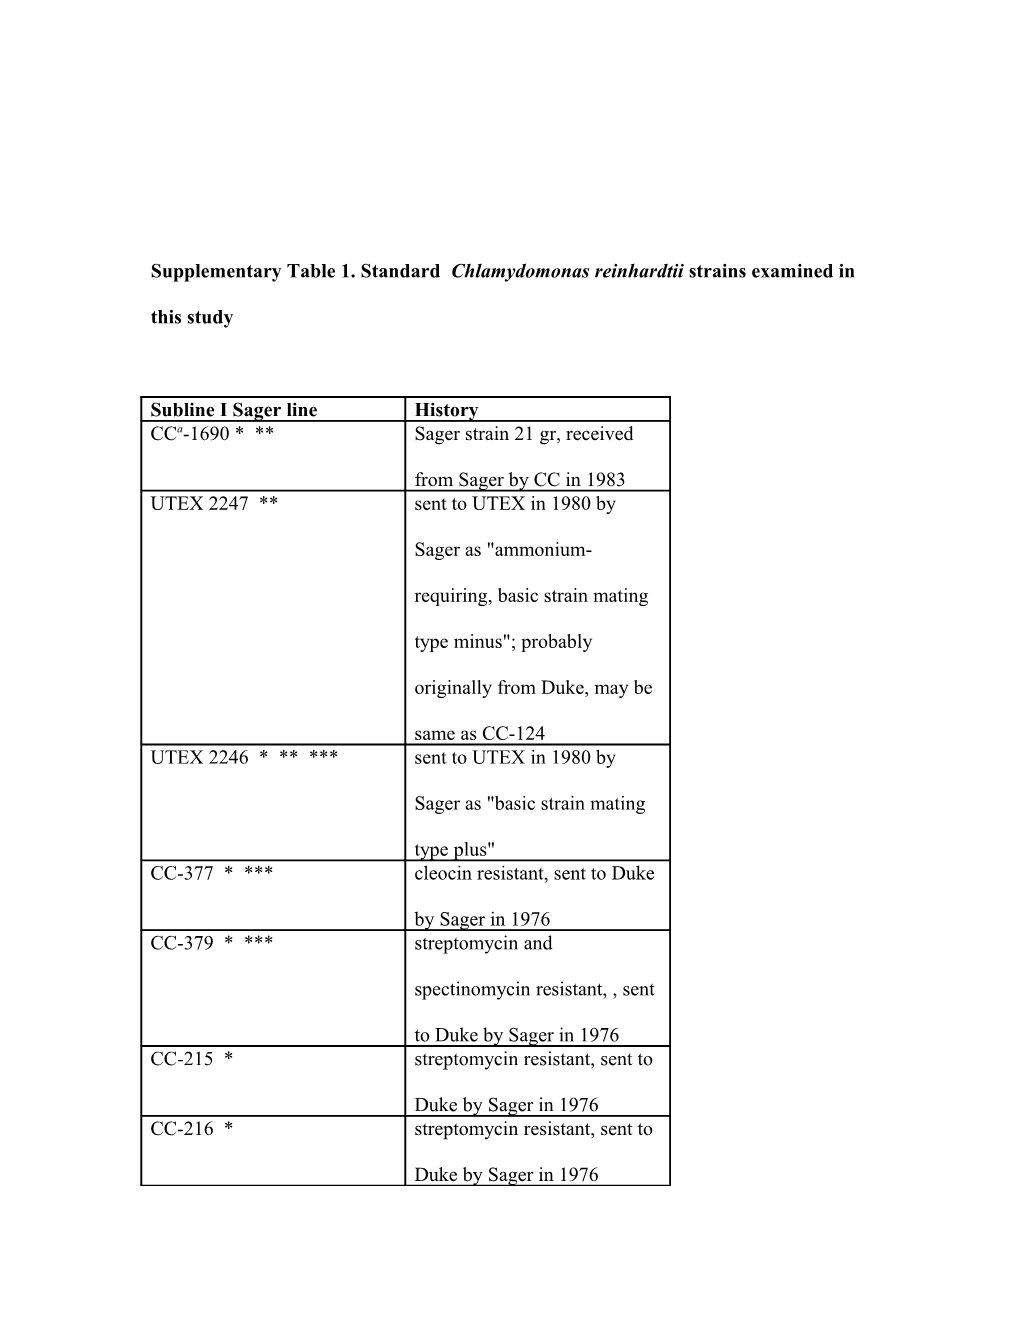 Supplementary Table 1. Standard Chlamydomonas Reinhardtii Strains Examined in This Study